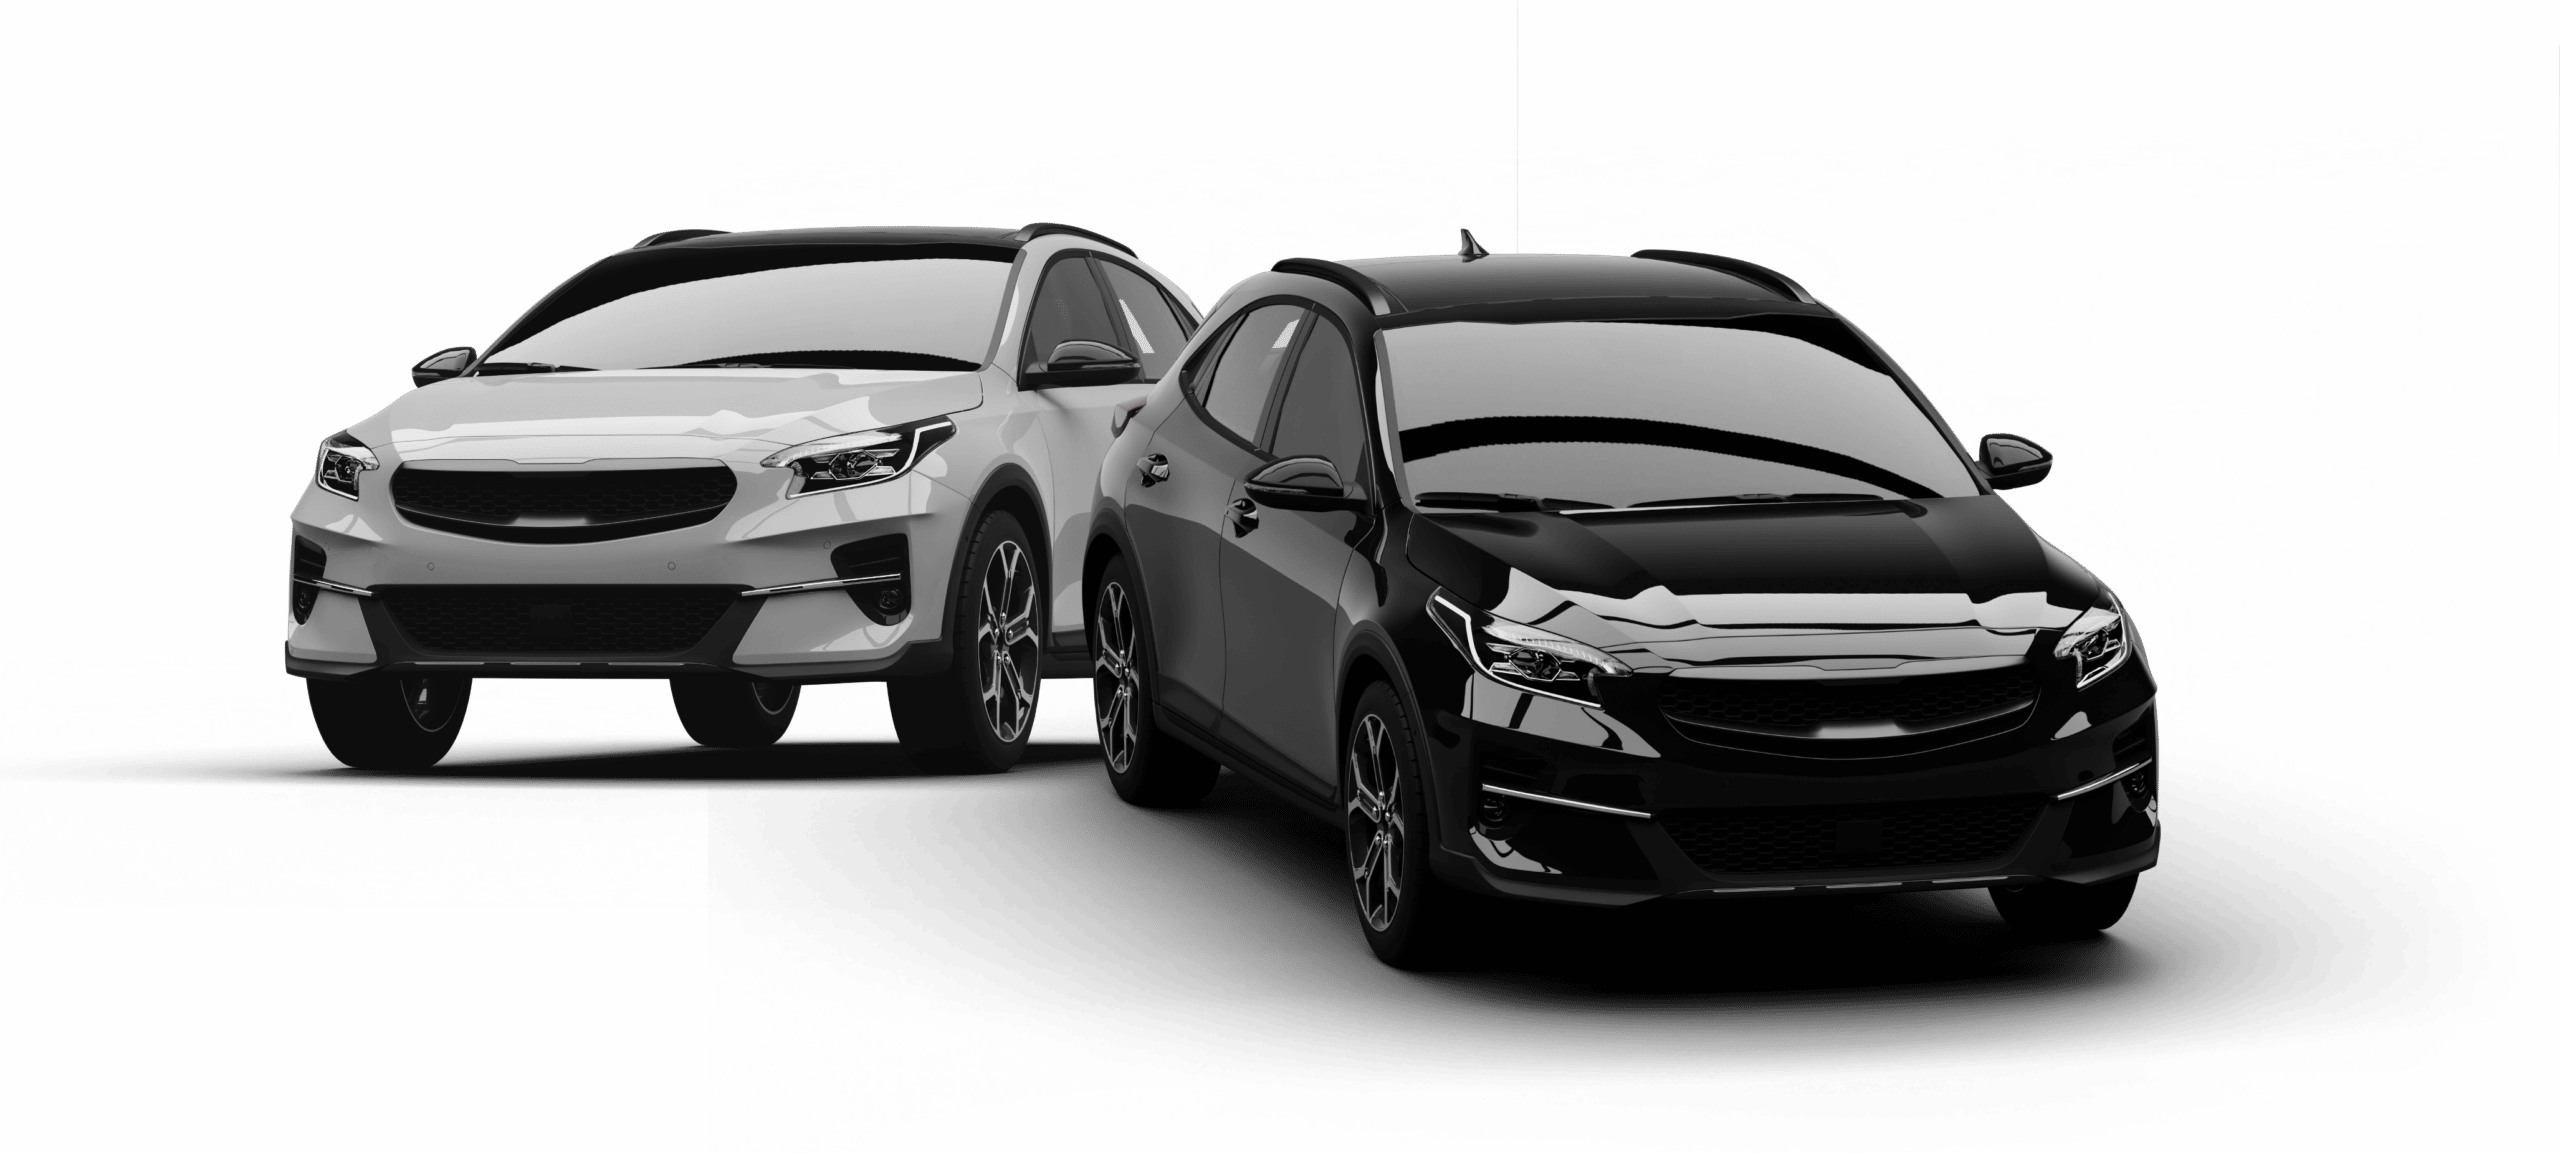 Image of a gray car on the left and a black car on the right. Concept image of auto repair and maintenance at Quality Car Care in North Liberty, IA.